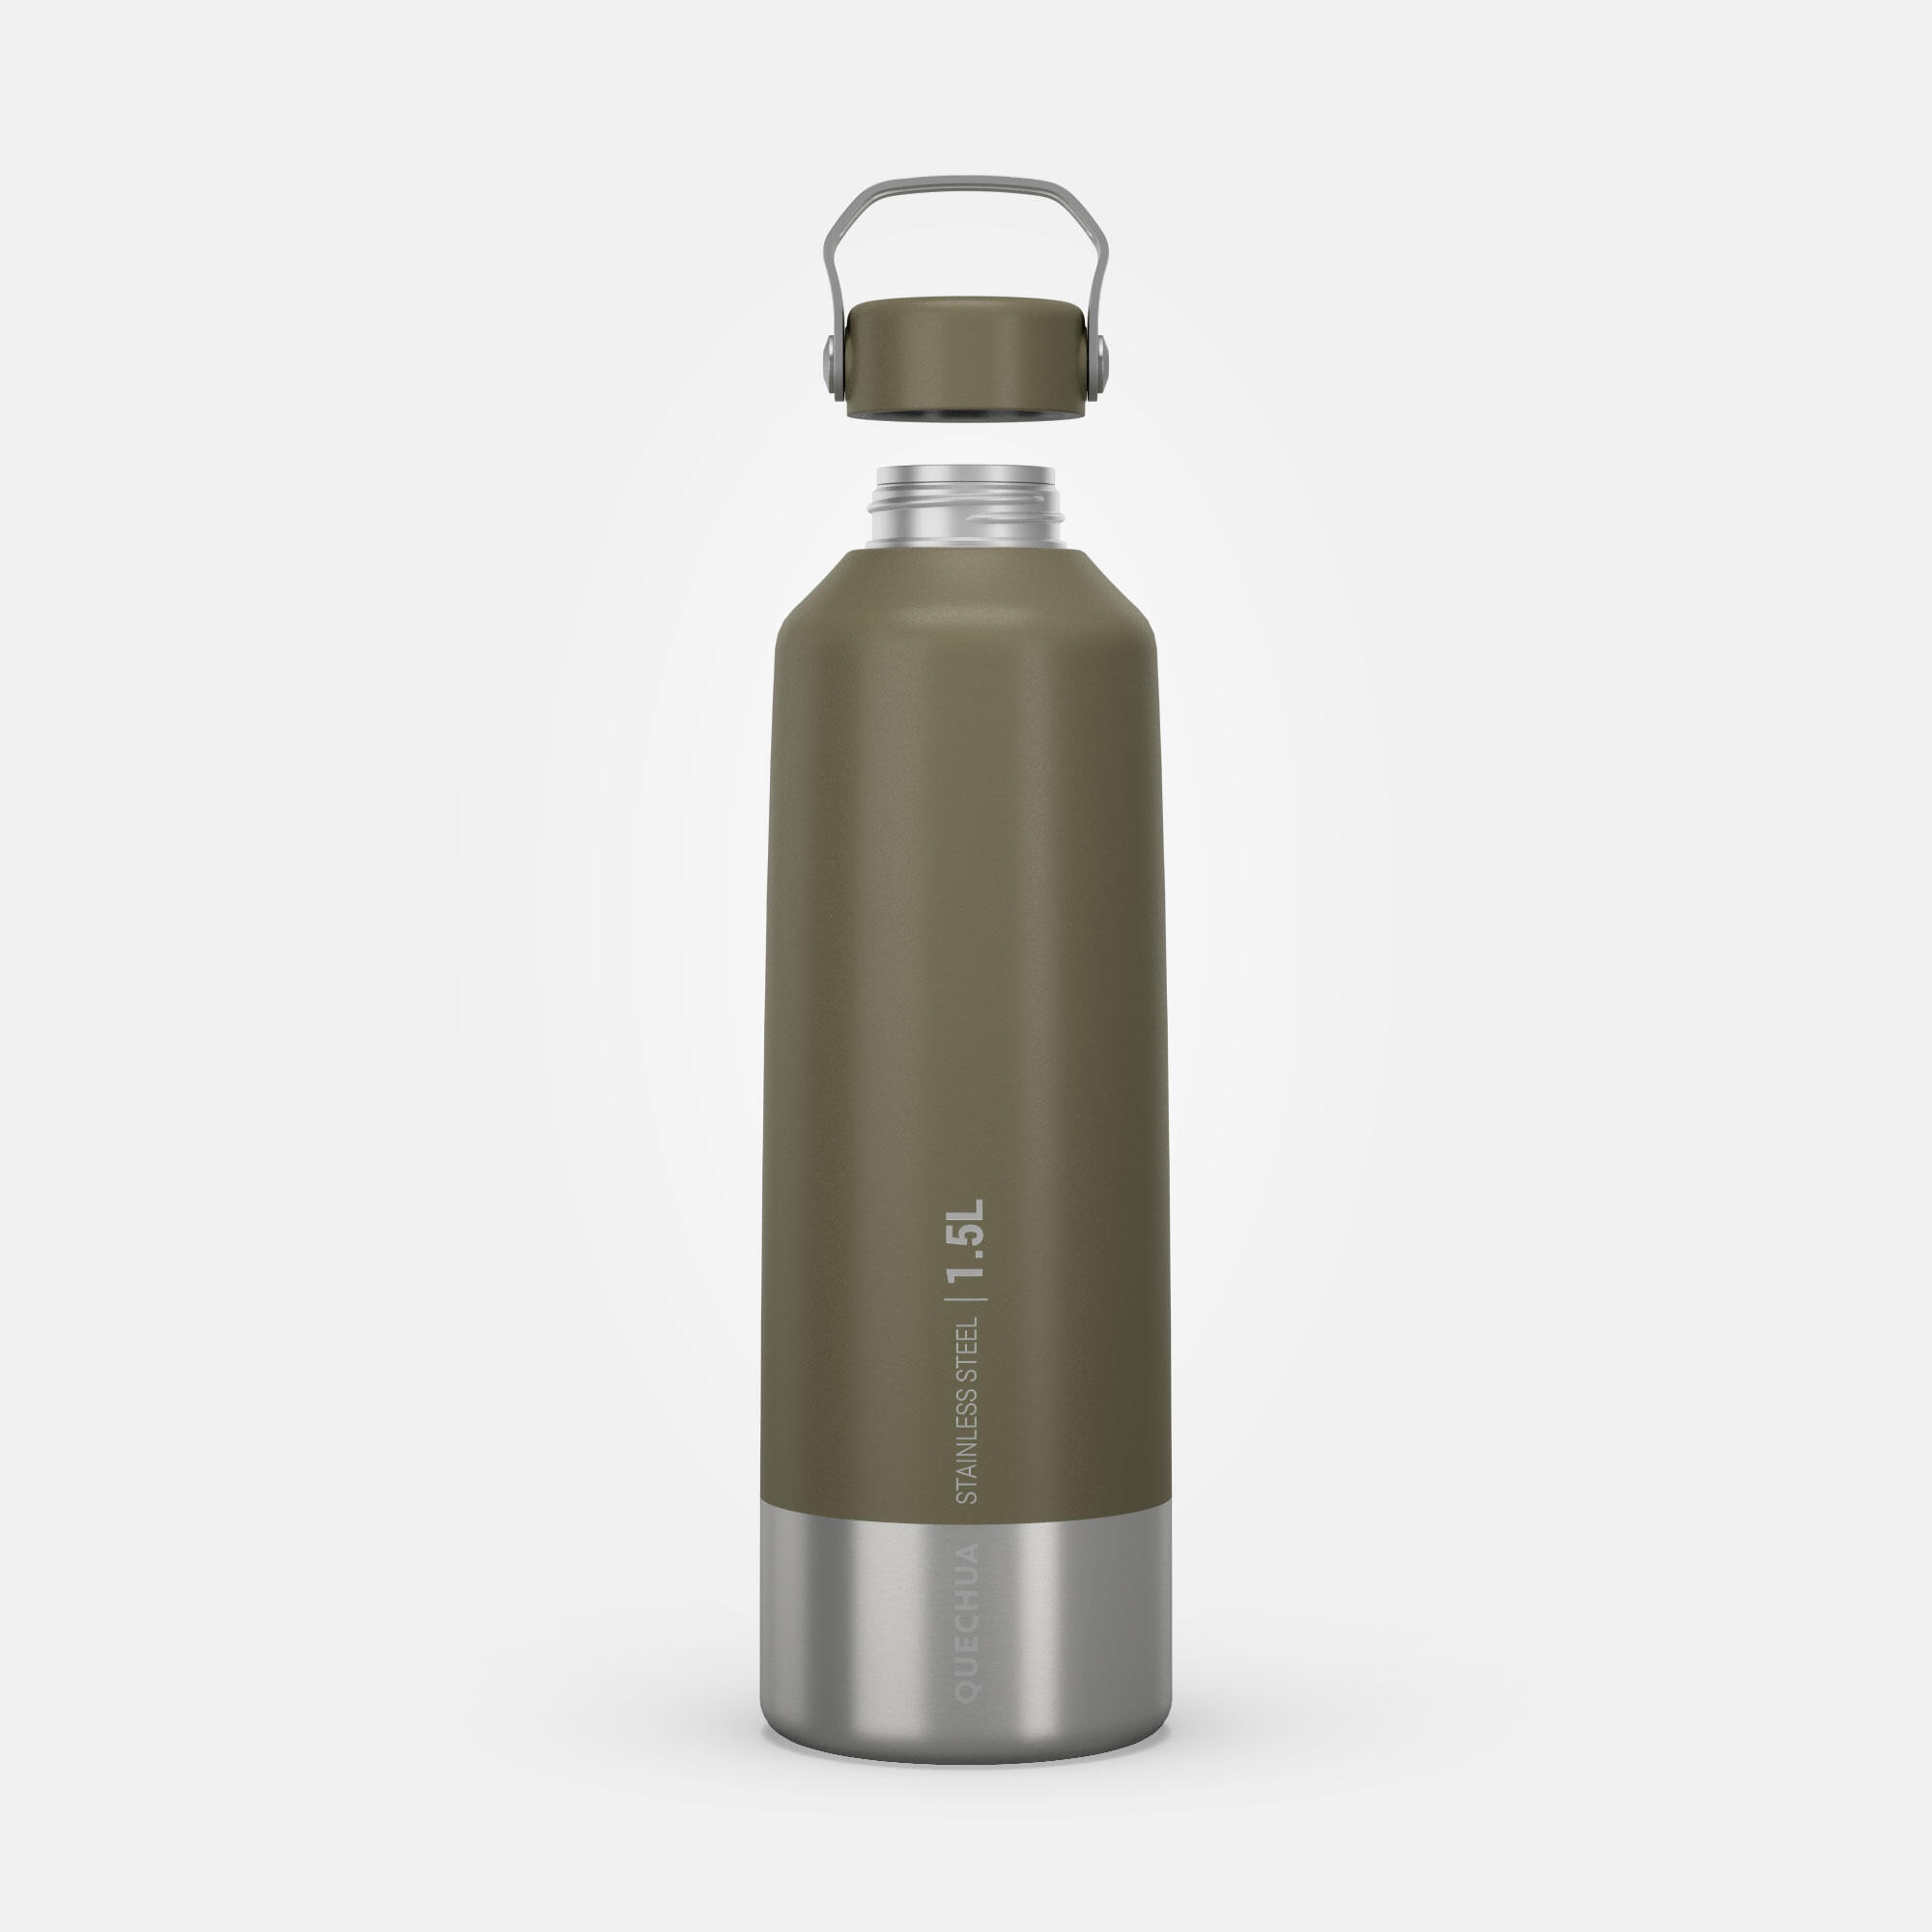 1.5 L stainless steel flask with screw cap for hiking - Khaki 2/10